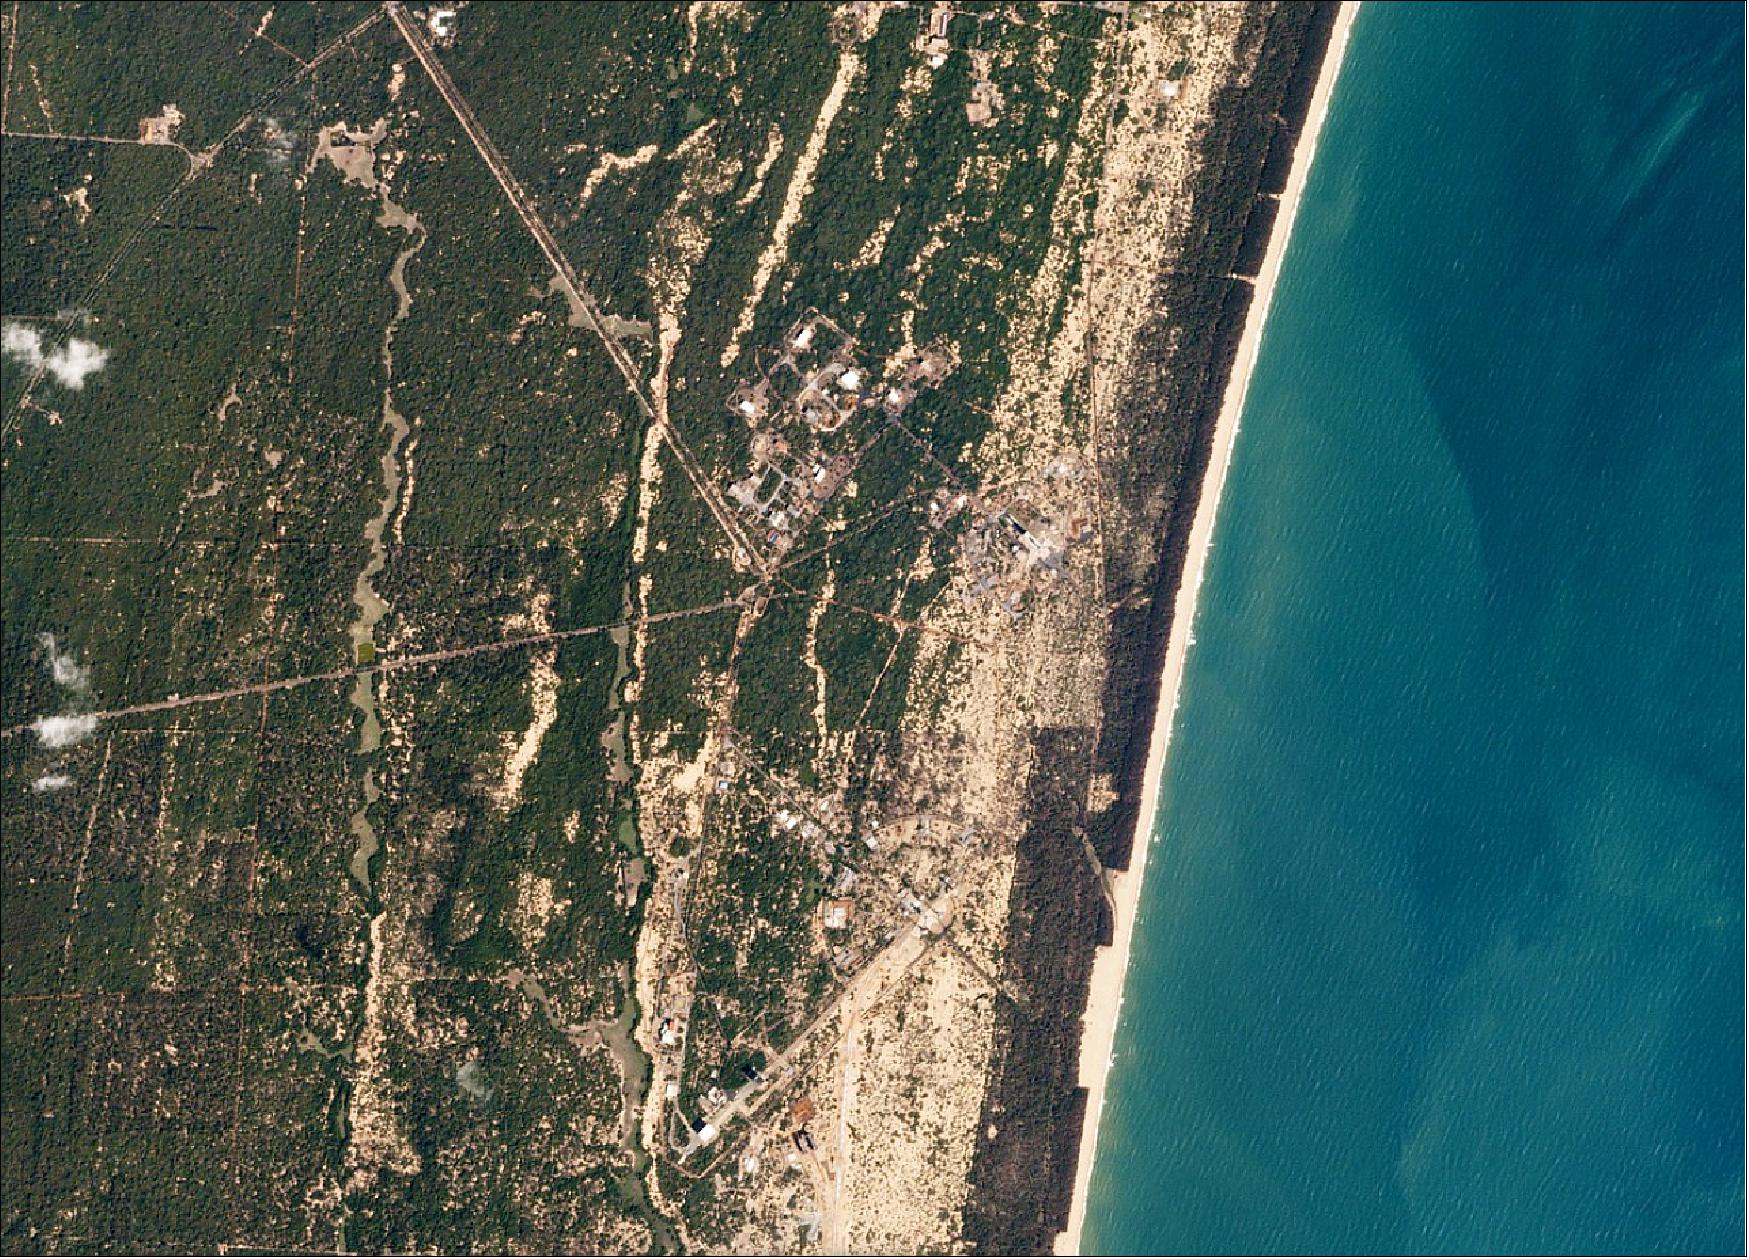 Figure 37: The SDSC (Satish Dhawan Space Center) in Sriharikota, India, imaged by the in-orbit Dove constellation on Feb. 13, 2017, two days prior to the launch of the PSLV-C37 vehicle with 88 Doves onboard (image credit: Planet) 70)